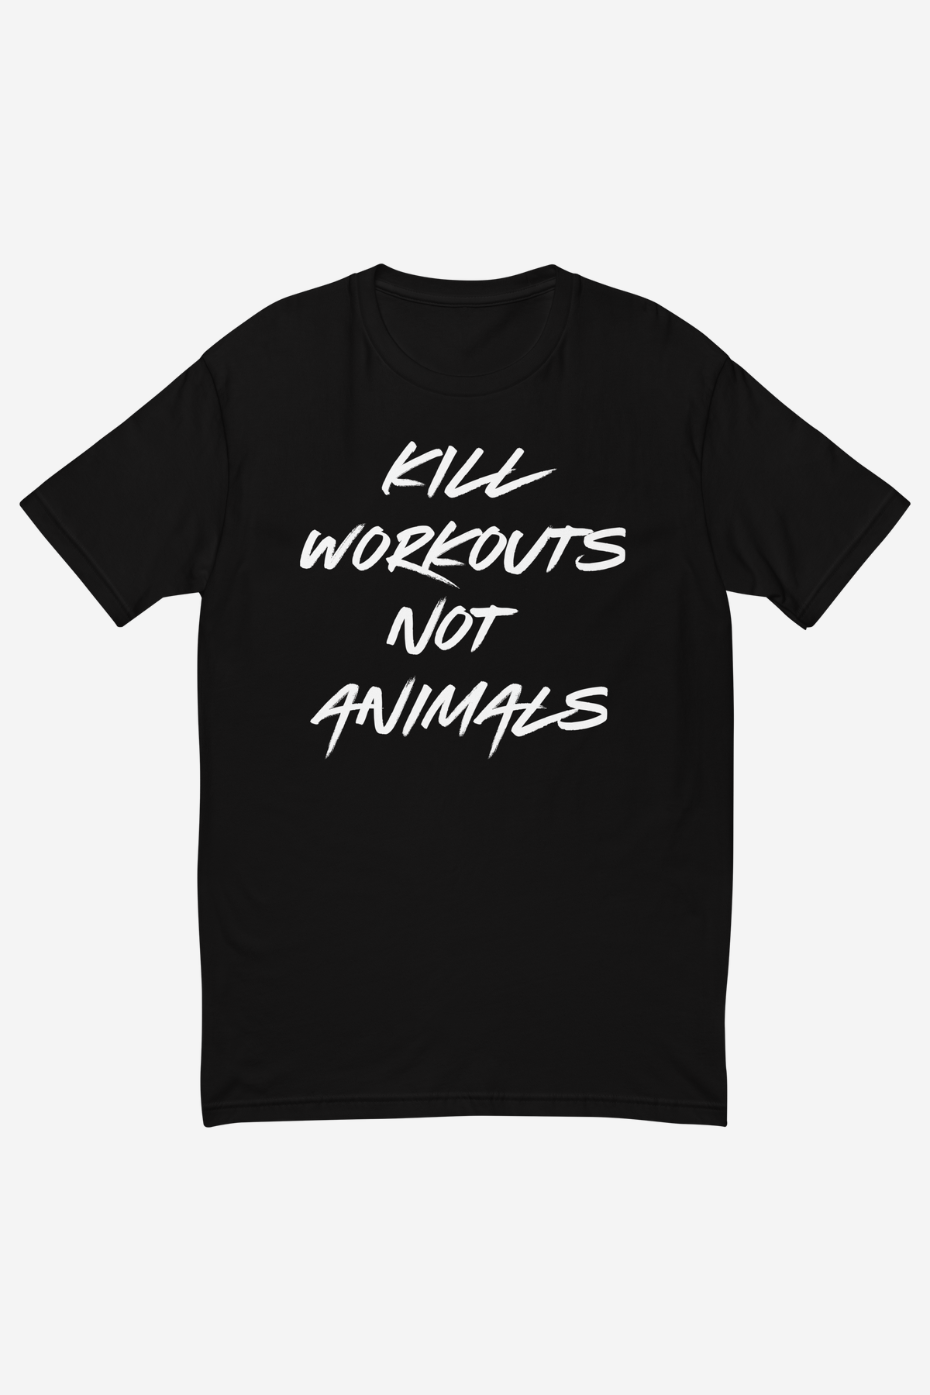 Kill Workouts Not Animals Men's Fitted T-Shirt